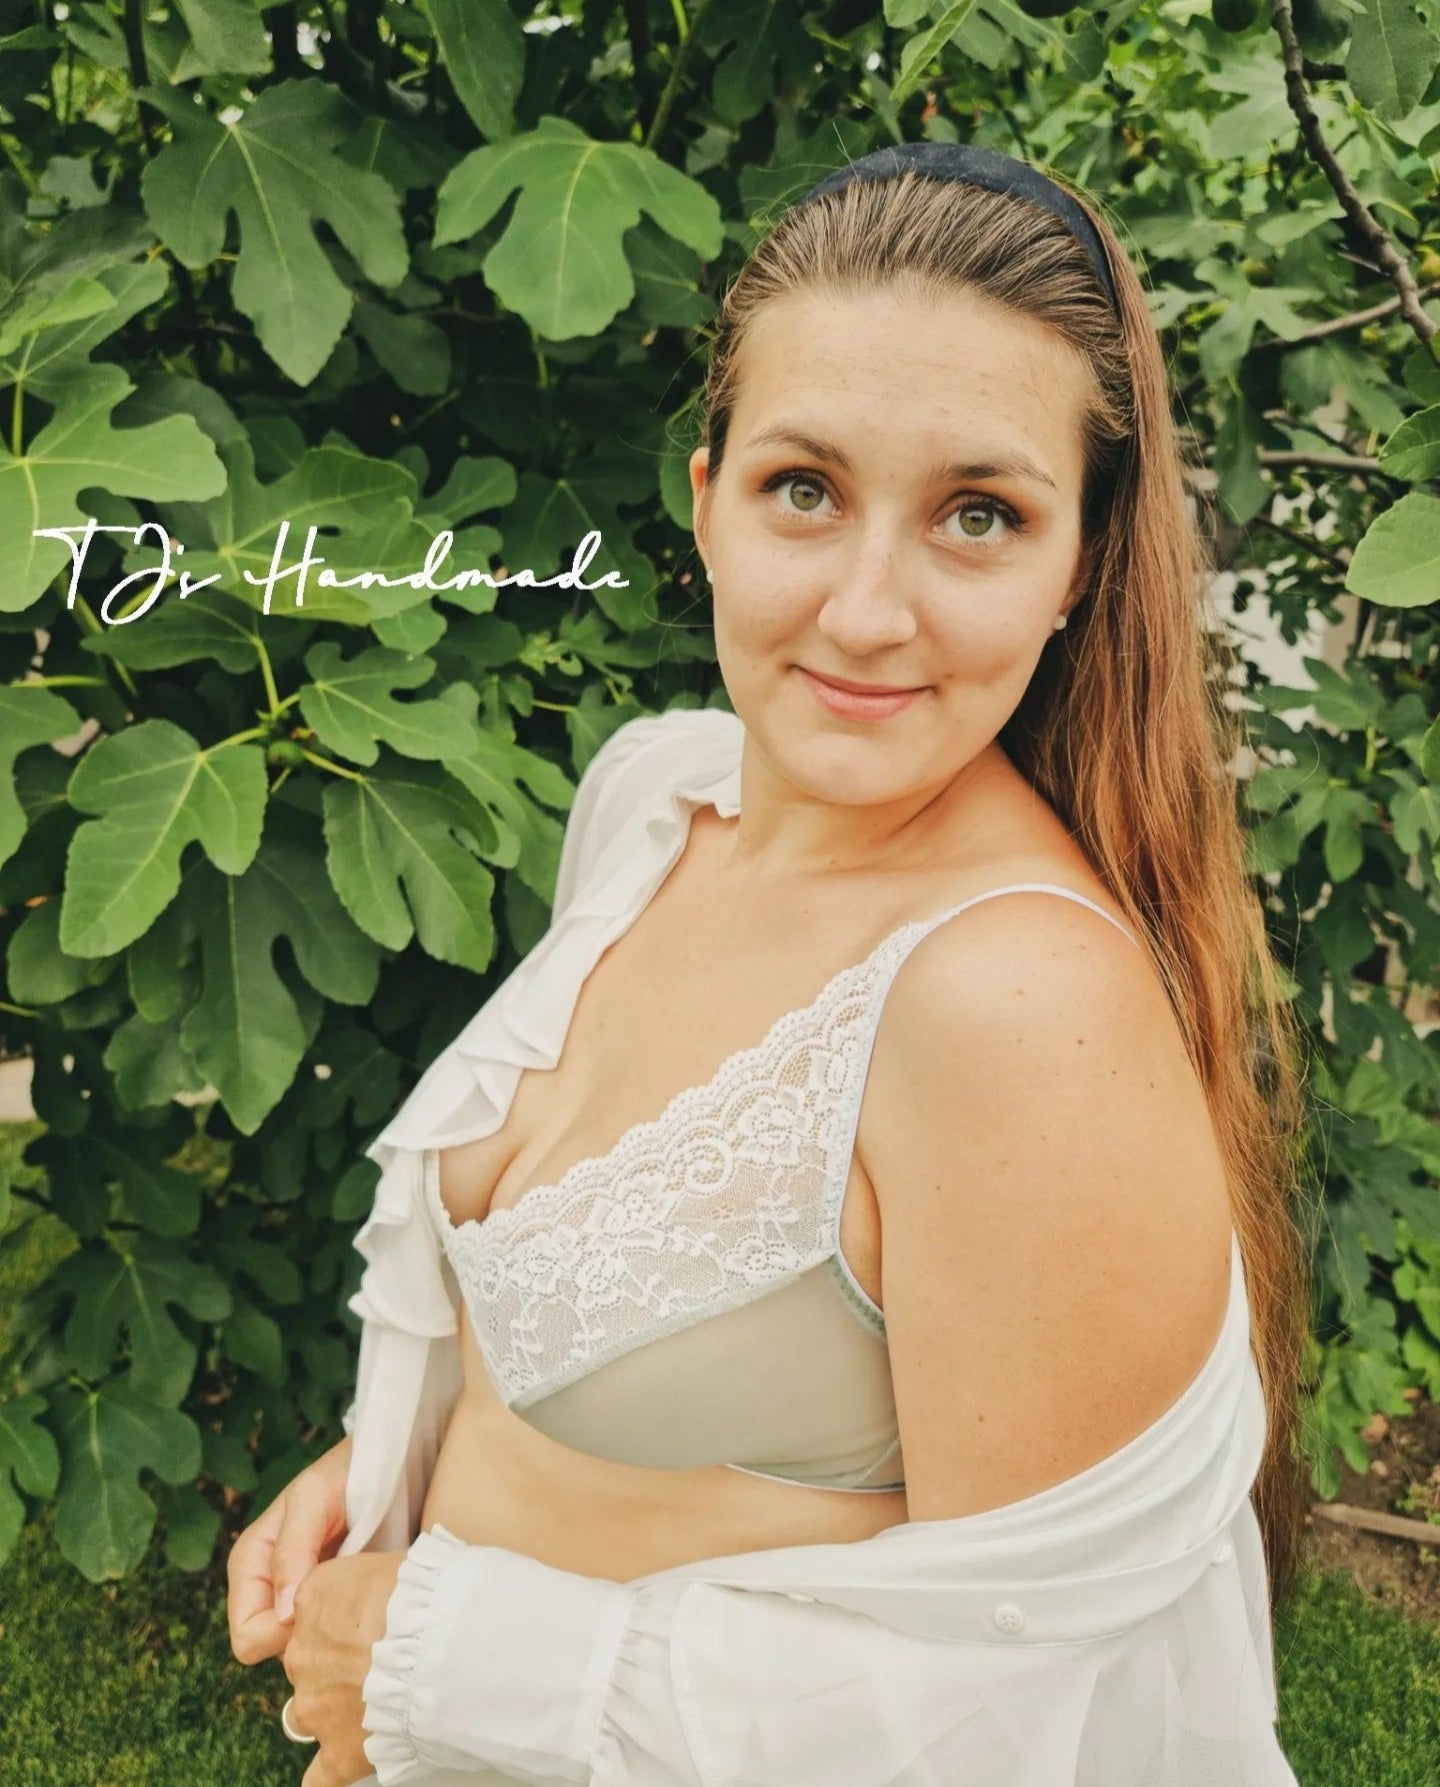 Bralette Vanessa sewing pattern in PDF, German / German. E-book with sewing instructions and patterns for sewing yourself IDsmx3